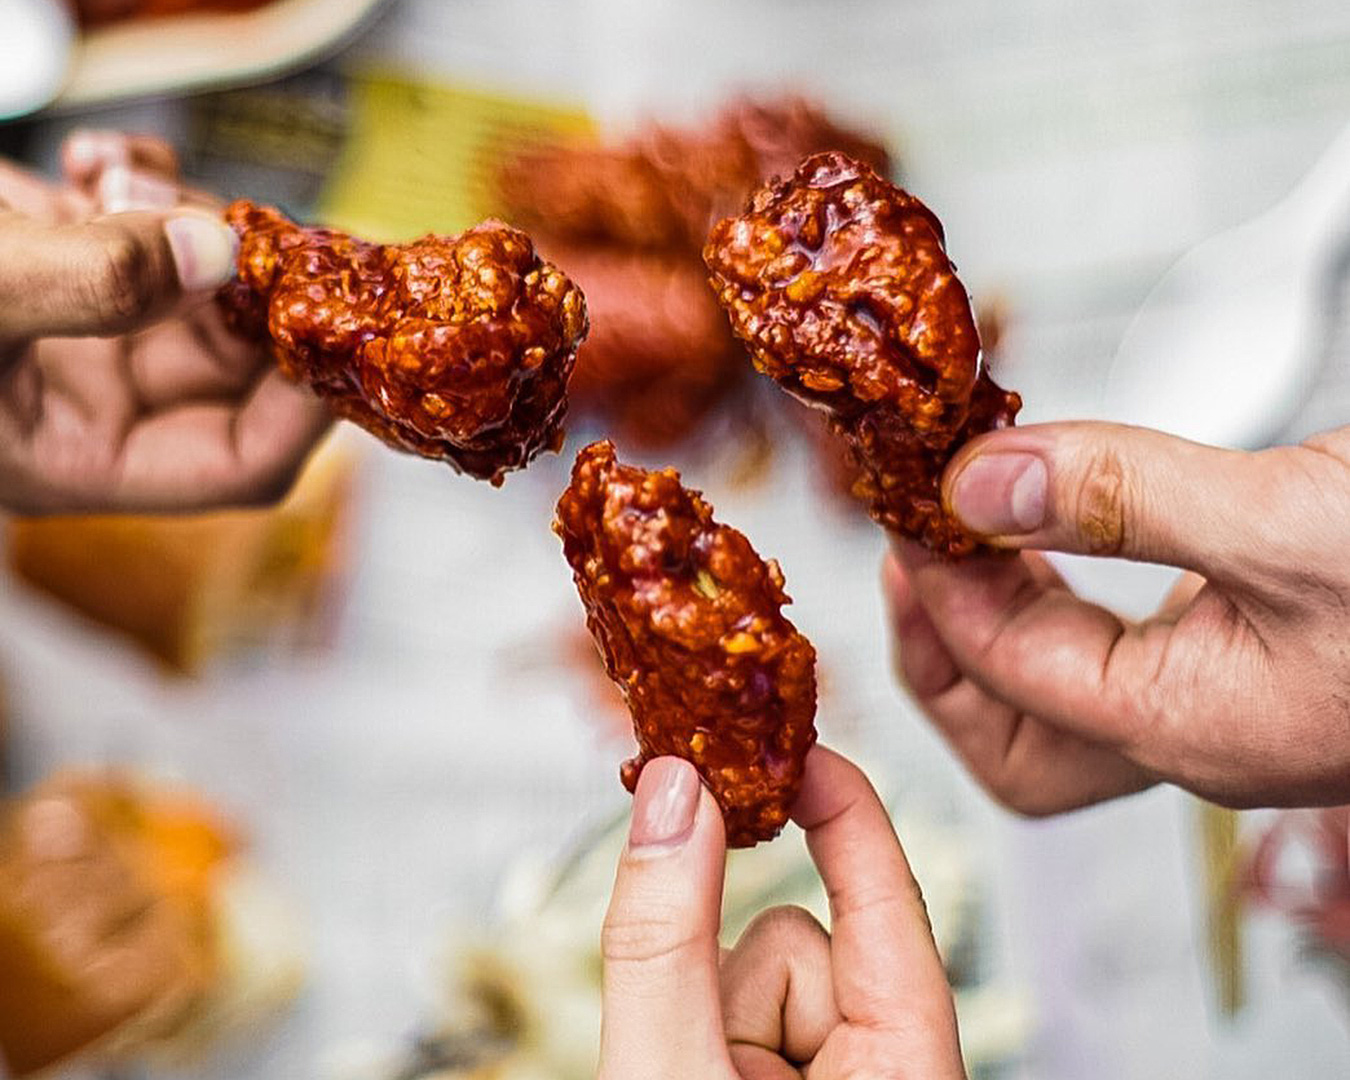 Three people hold up fried chicken from Gochu, one of the best fried chicken joints in Auckland.